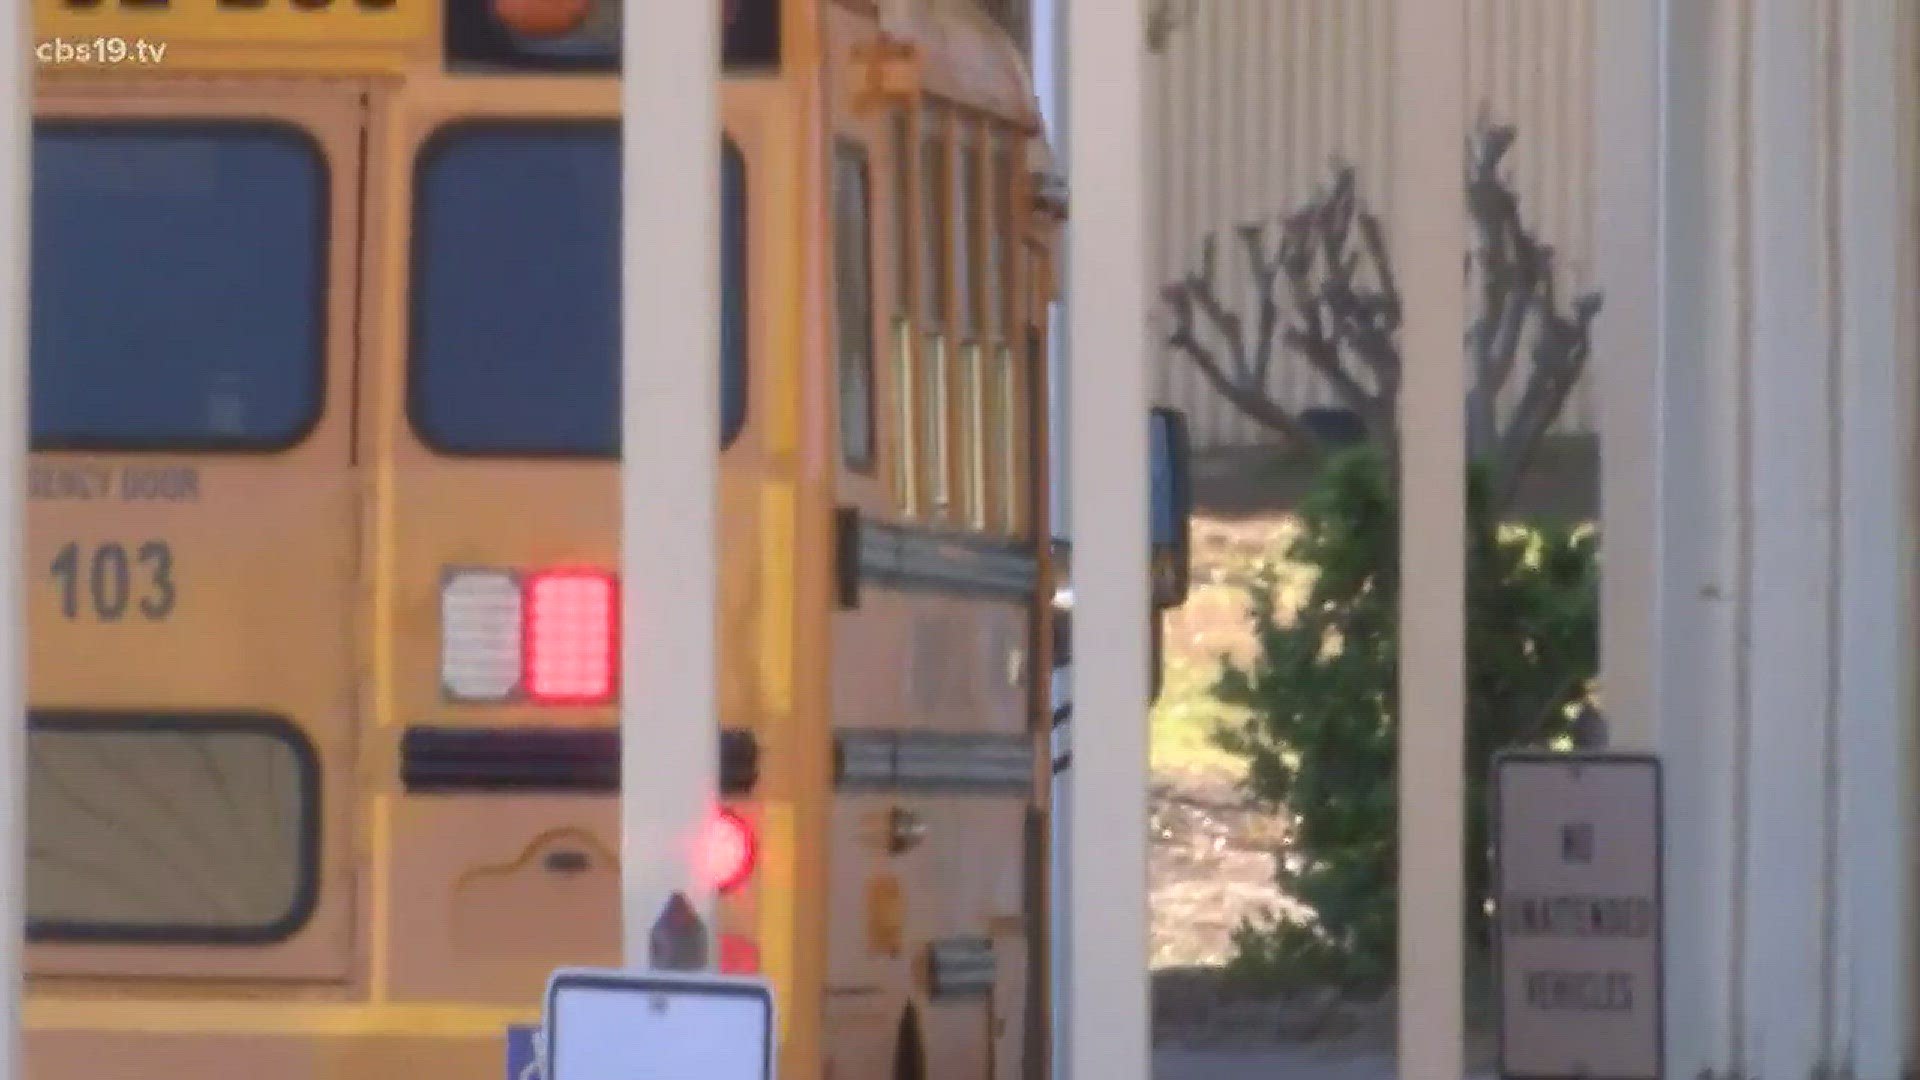 Winona ISD students were released early after a power outage Friday afternoon.